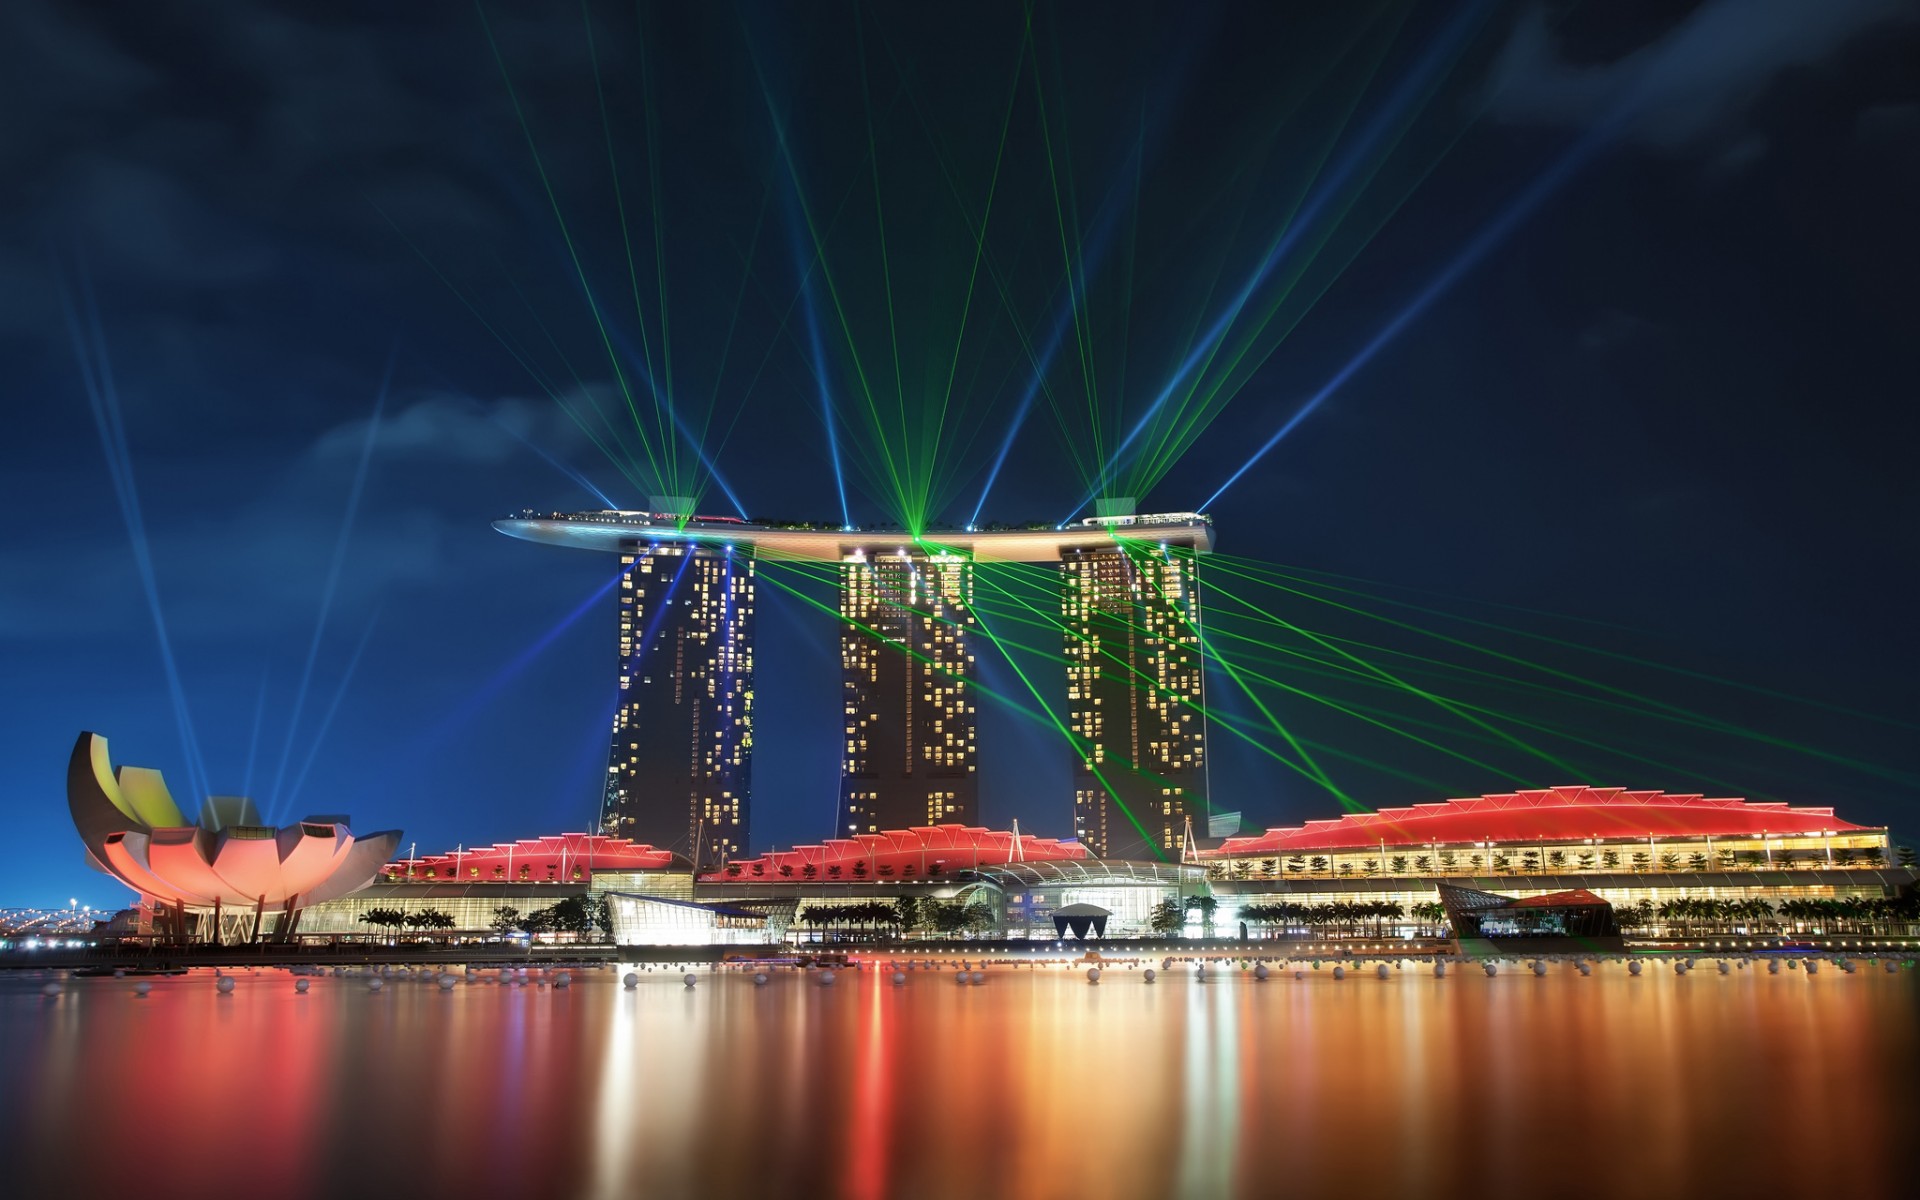 singapore, Gardens, By, The, Bay, Night, Architecture, Skyscrapers, Lights, Sky, Bay, Reflection, Singapore, The, Night, Sky, The, City state, Metropolis, Skyscrapers, Architecture, Lights, Lights, Bay, Reflectio Wallpaper